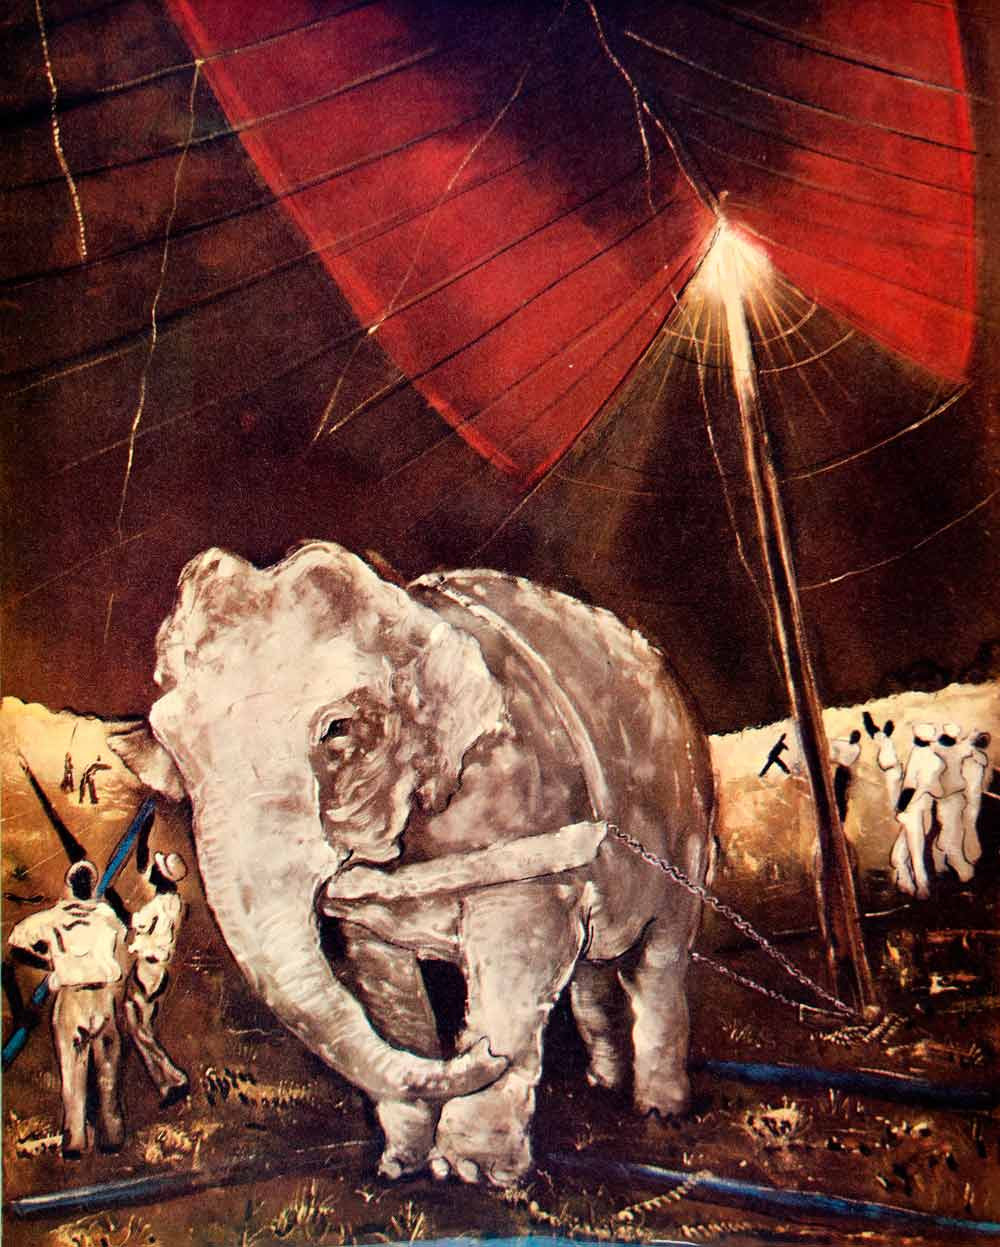 1947 Color Print Elephant Circus Karl Zerbe Pull Haul Tent Red Ringling YFT3 - Period Paper
